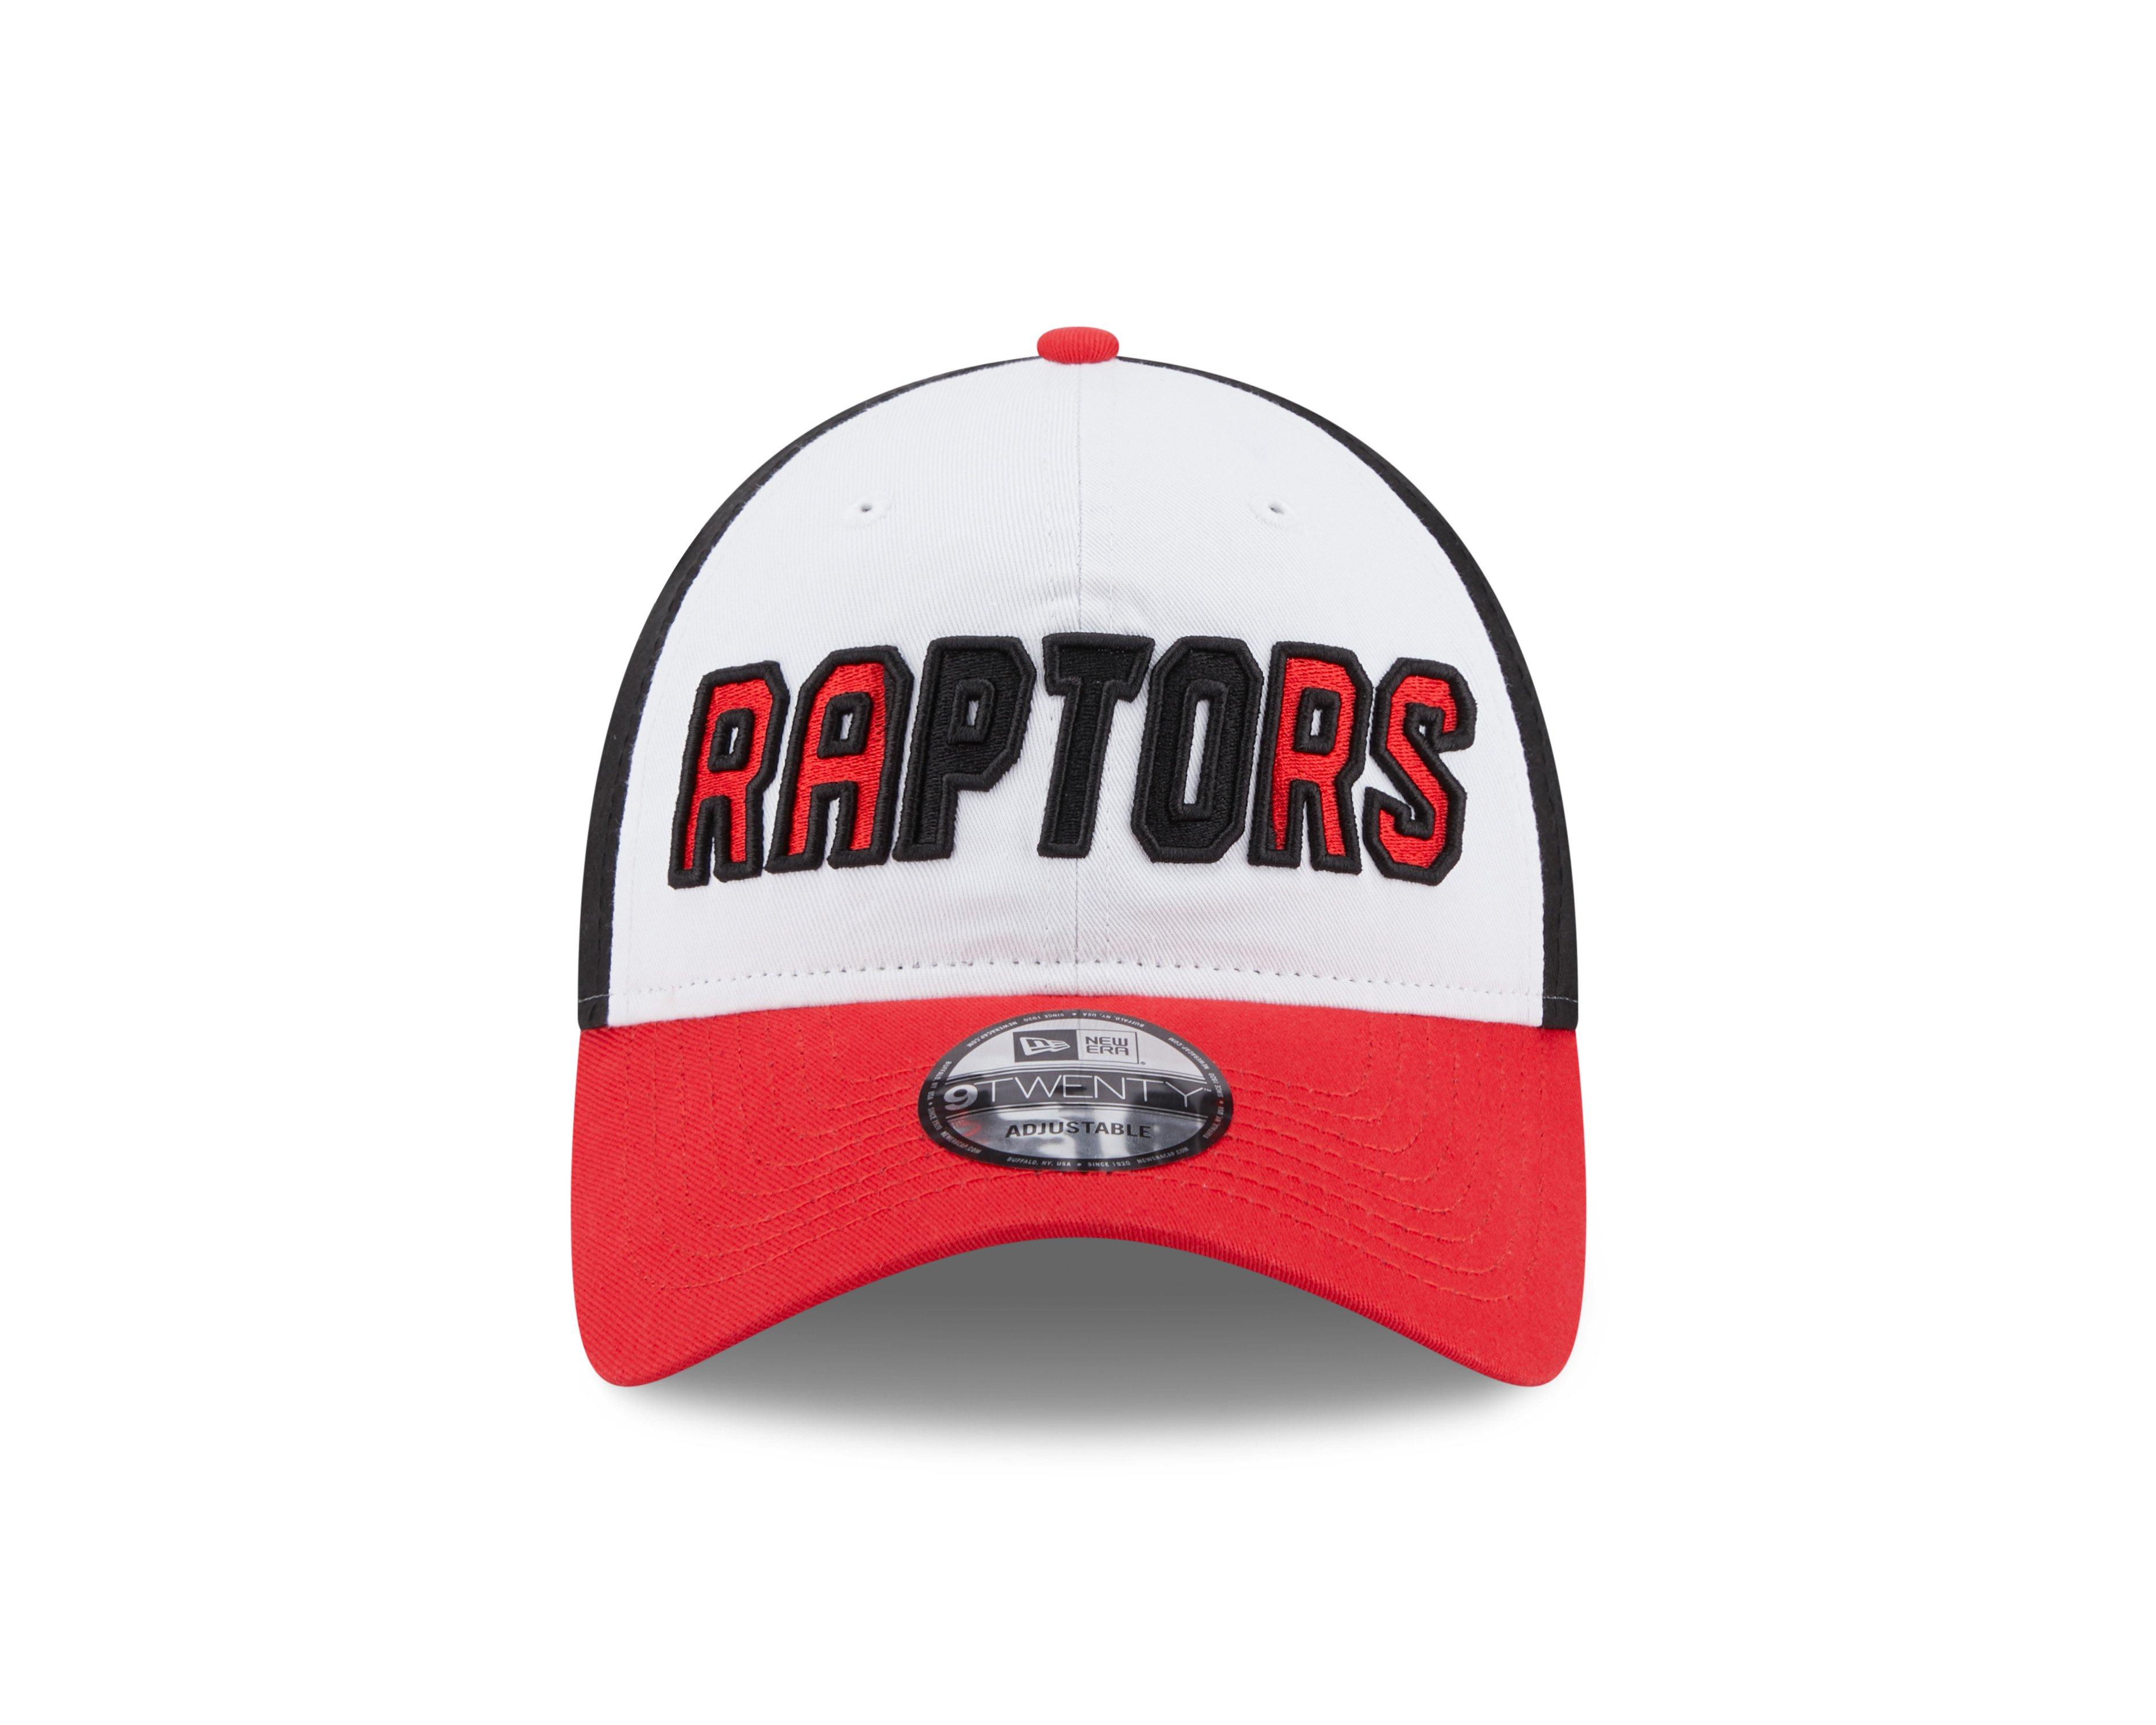 2021 Fashion Basketball Snapback Hats Sports All Teams Caps MenWomen  Adjustable Football Cap Size More Than 10000 Style HHH3845614 From Zagv,  $11.27